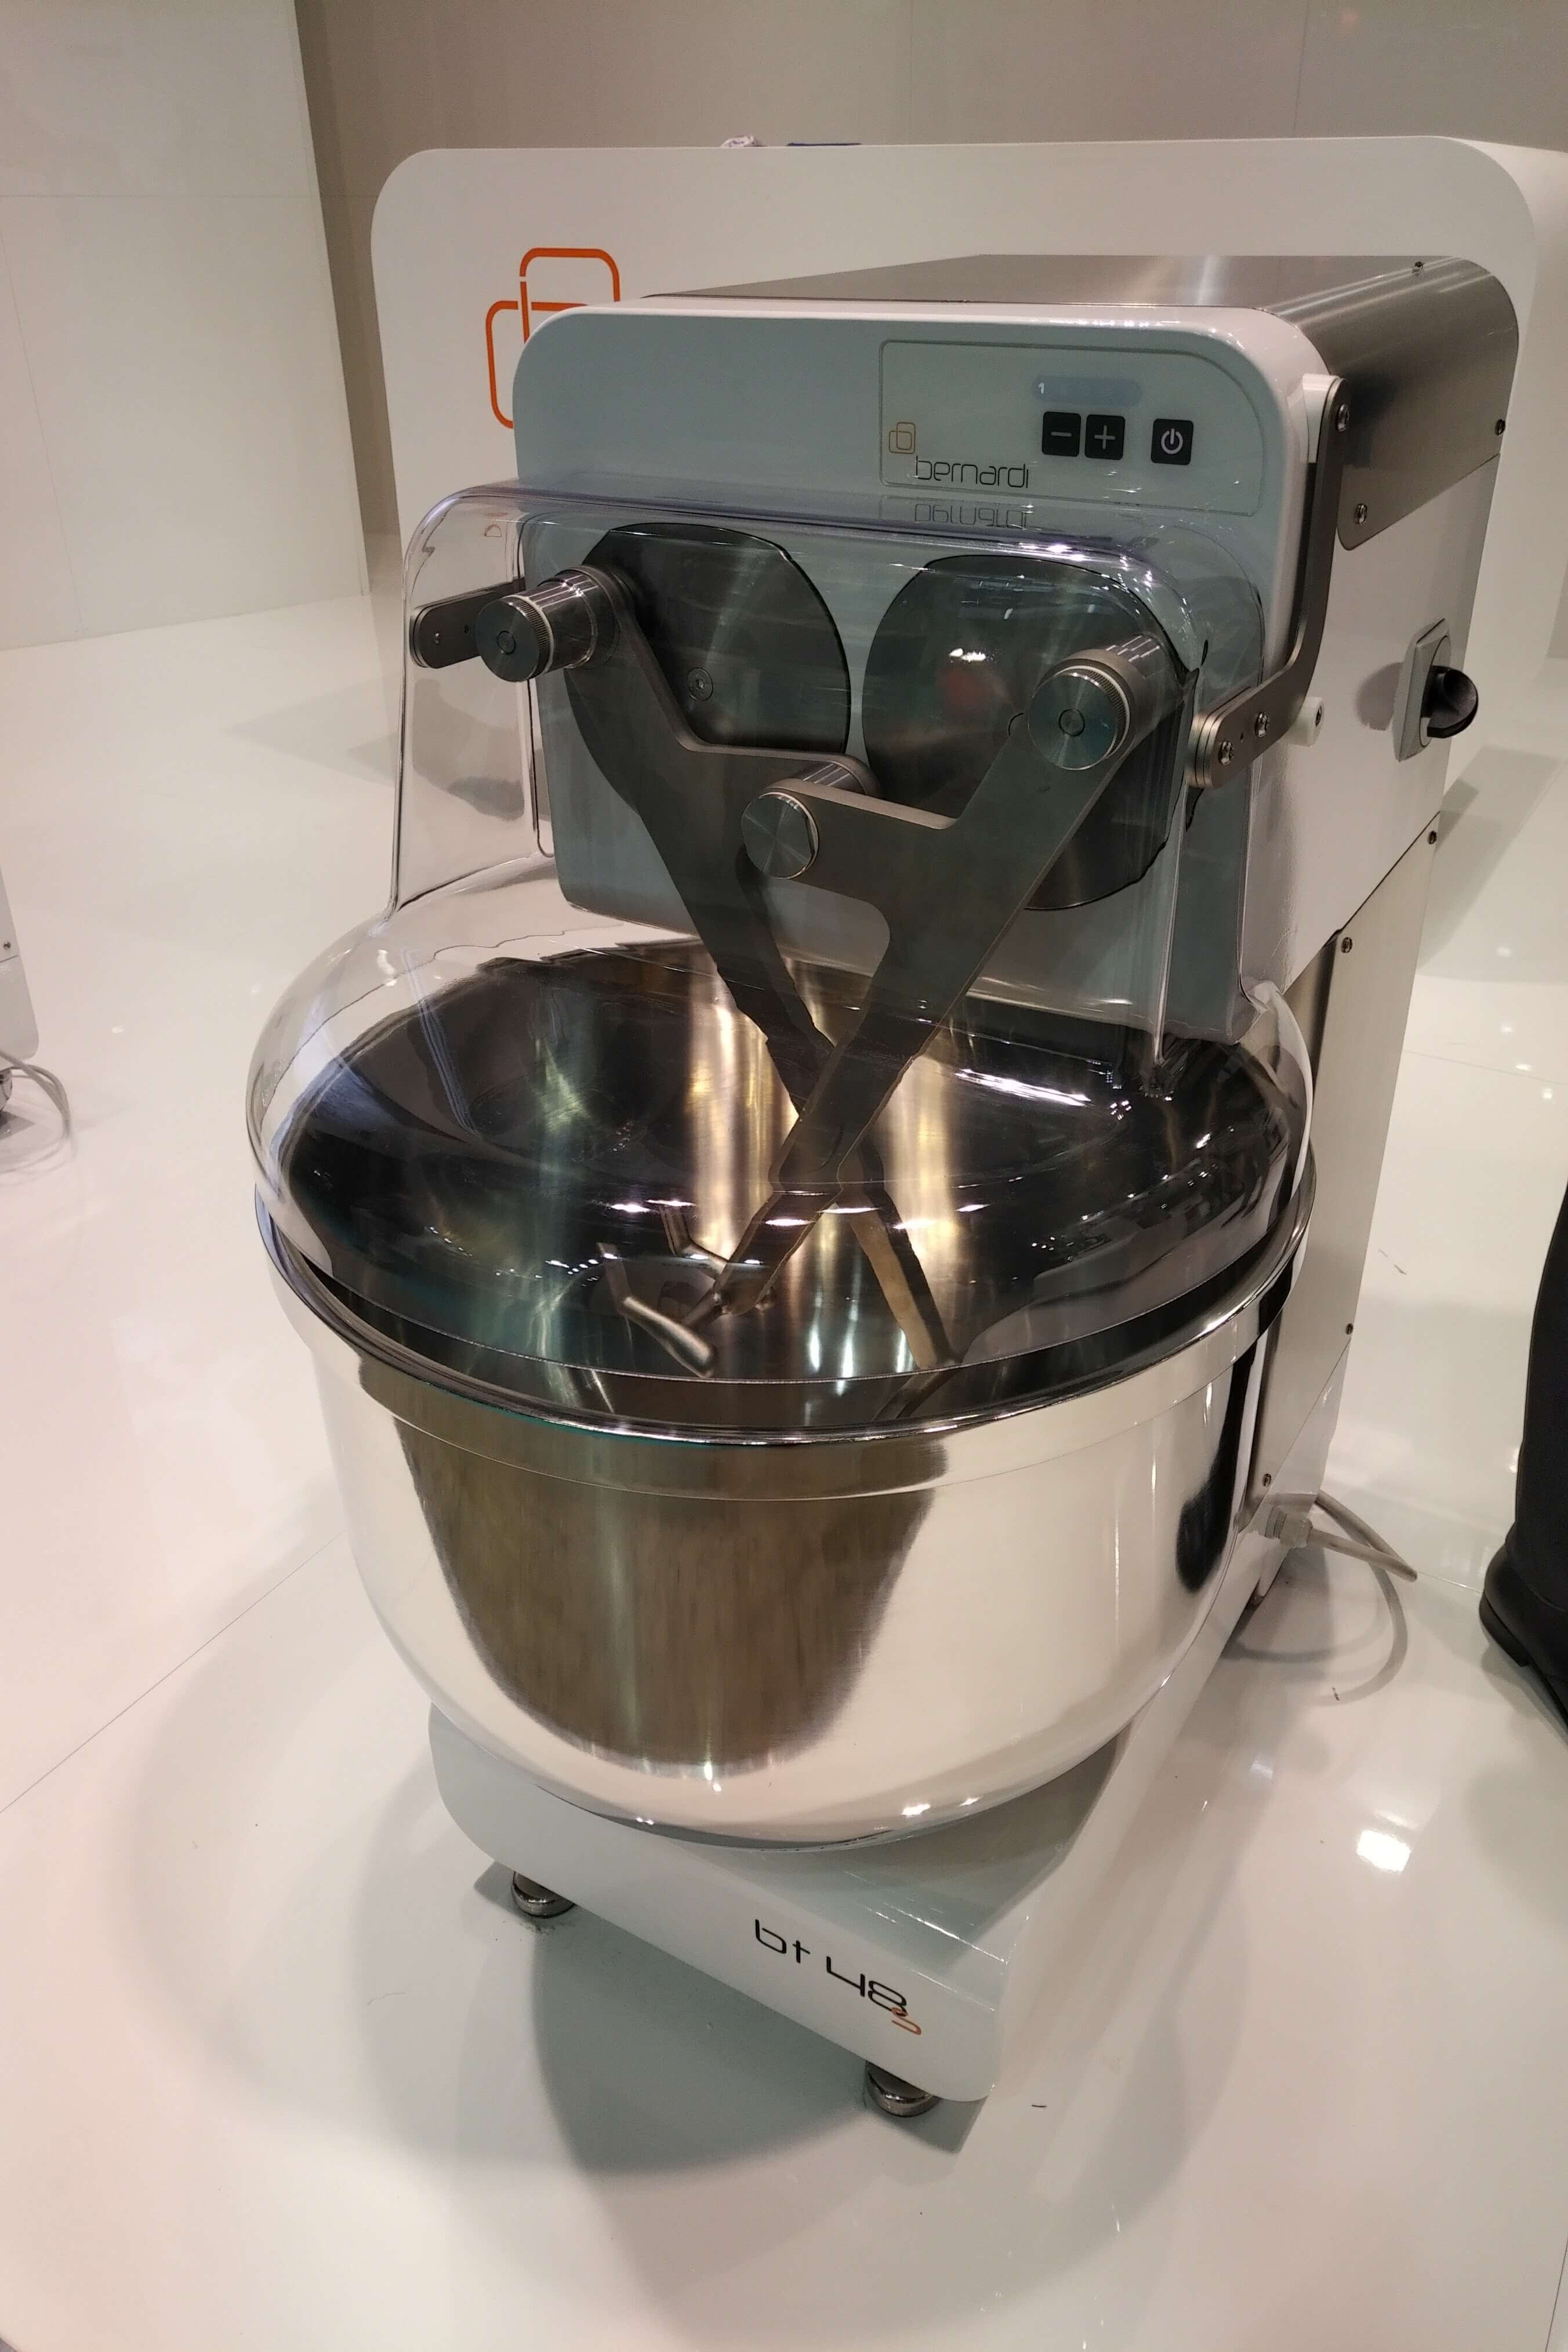 Bernardi up to 12 kg: The perfect mixer with 2-arm immersion kneading technology from Italy